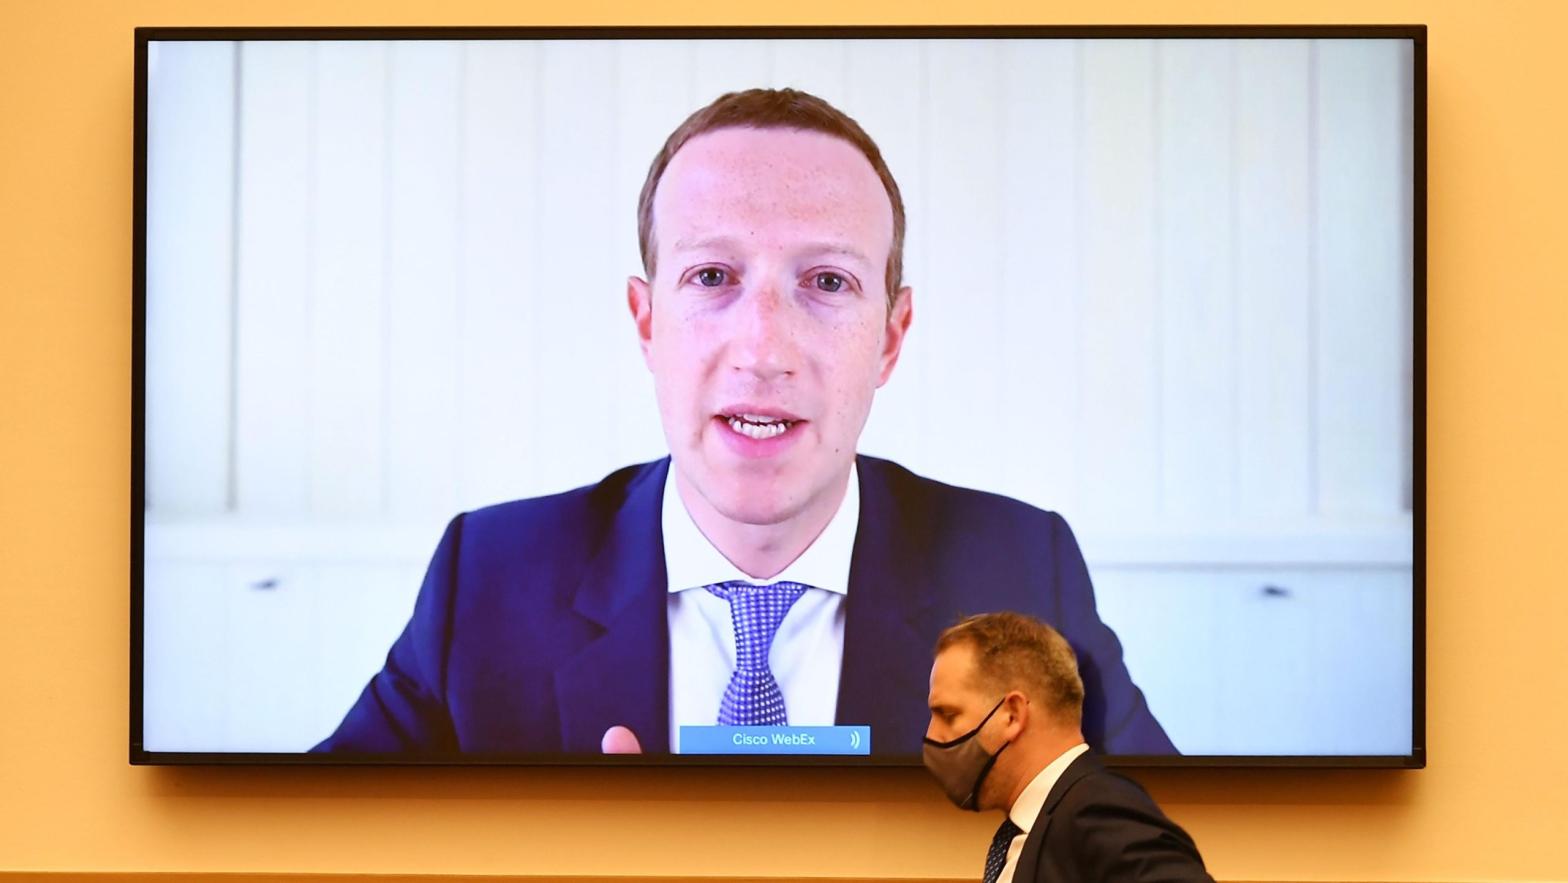 Facebook CEO Mark Zuckerberg shown on a screen to virtual testify before the House Judiciary Subcommittee on Antitrust, Commercial and Administrative Law hearing on July 29, 2020. (Photo: Mandel Ngan/Pool/AFP, Getty Images)